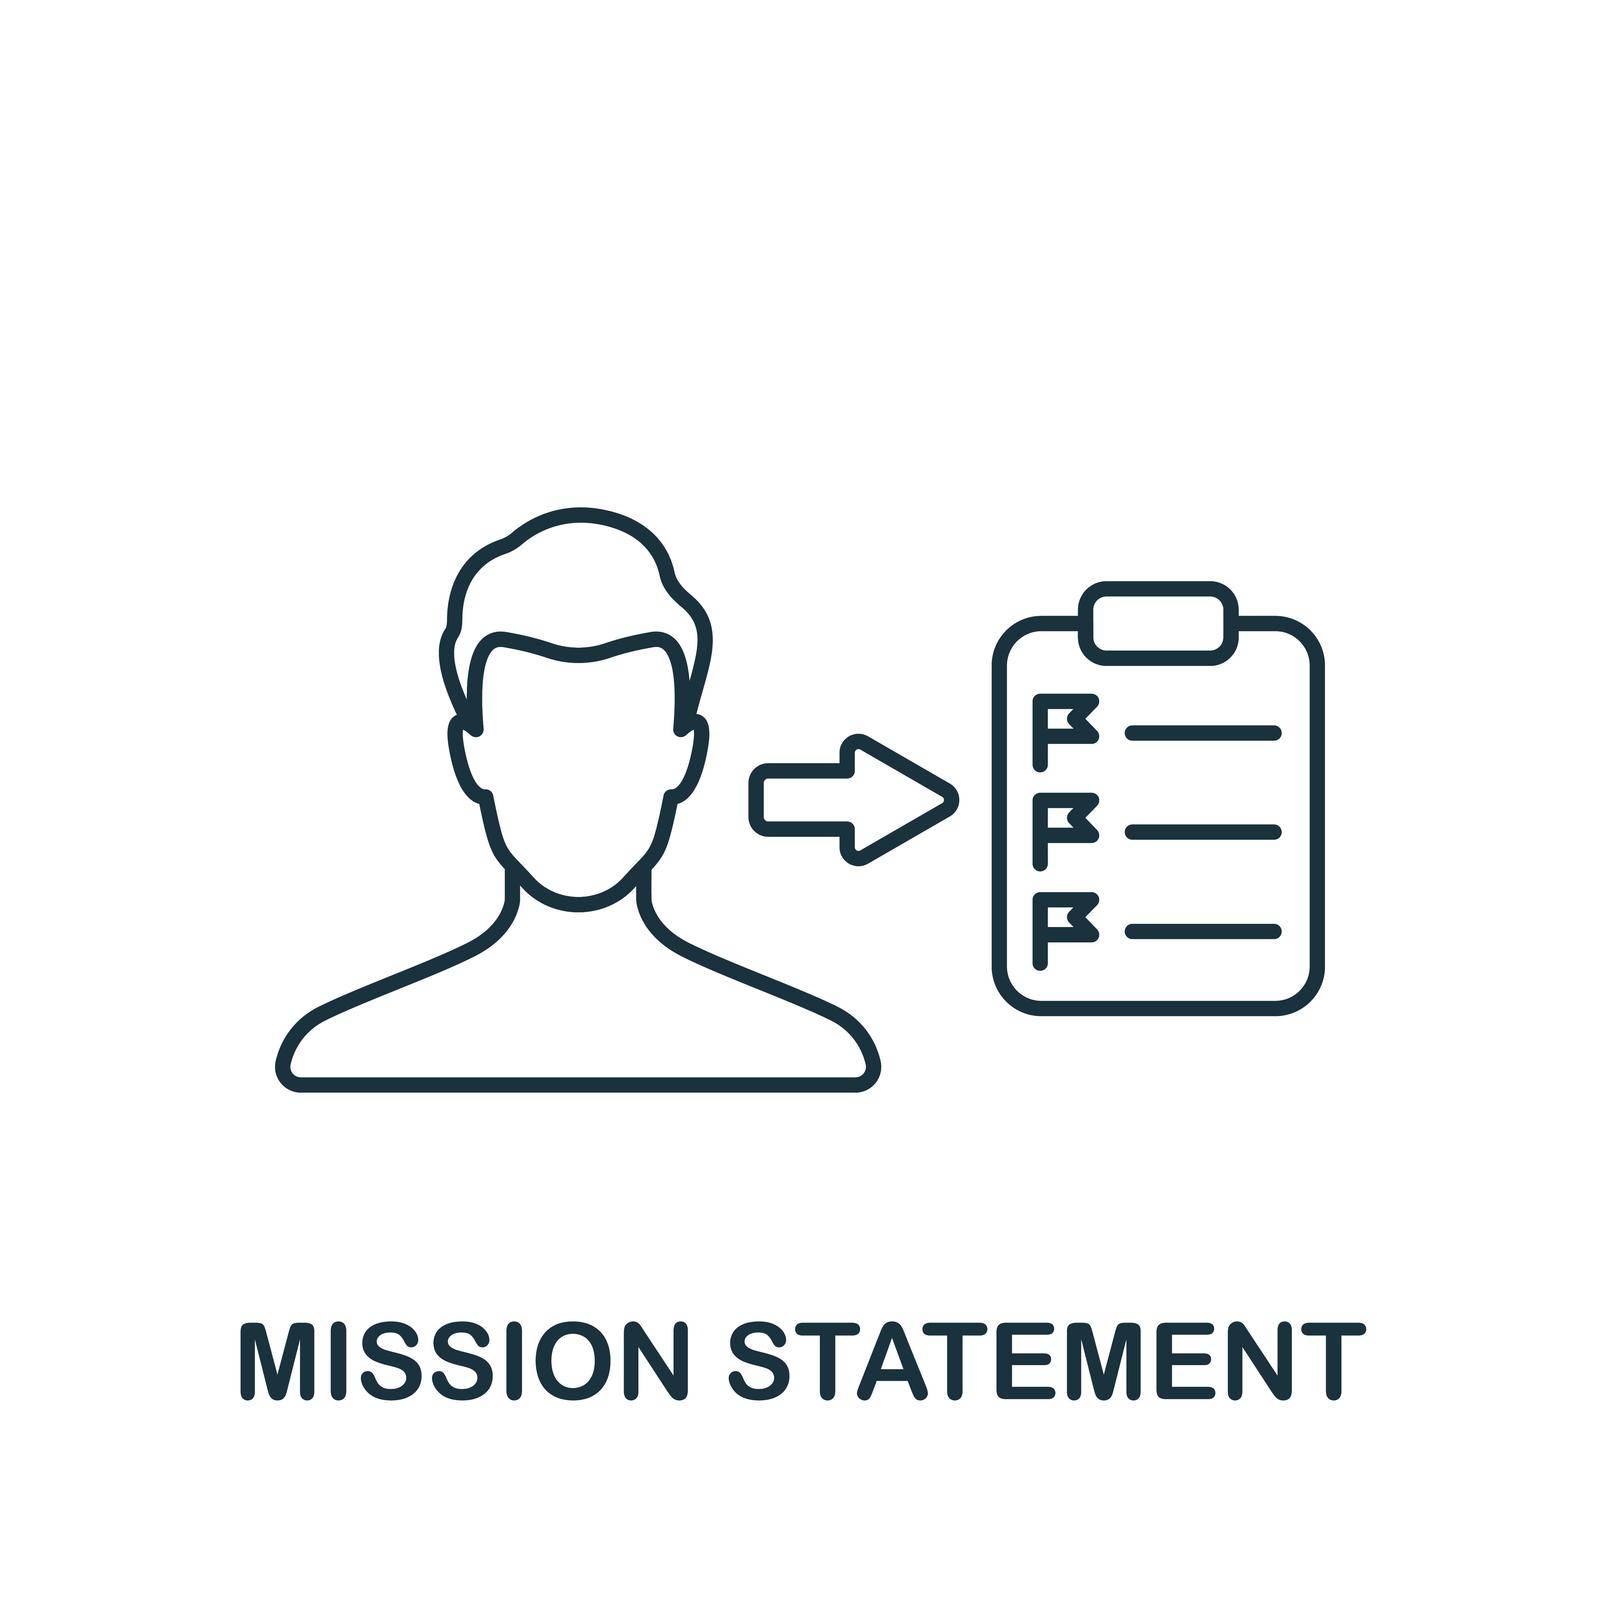 Mission Statement icon. Monochrome simple icon for templates, web design and infographics by simakovavector